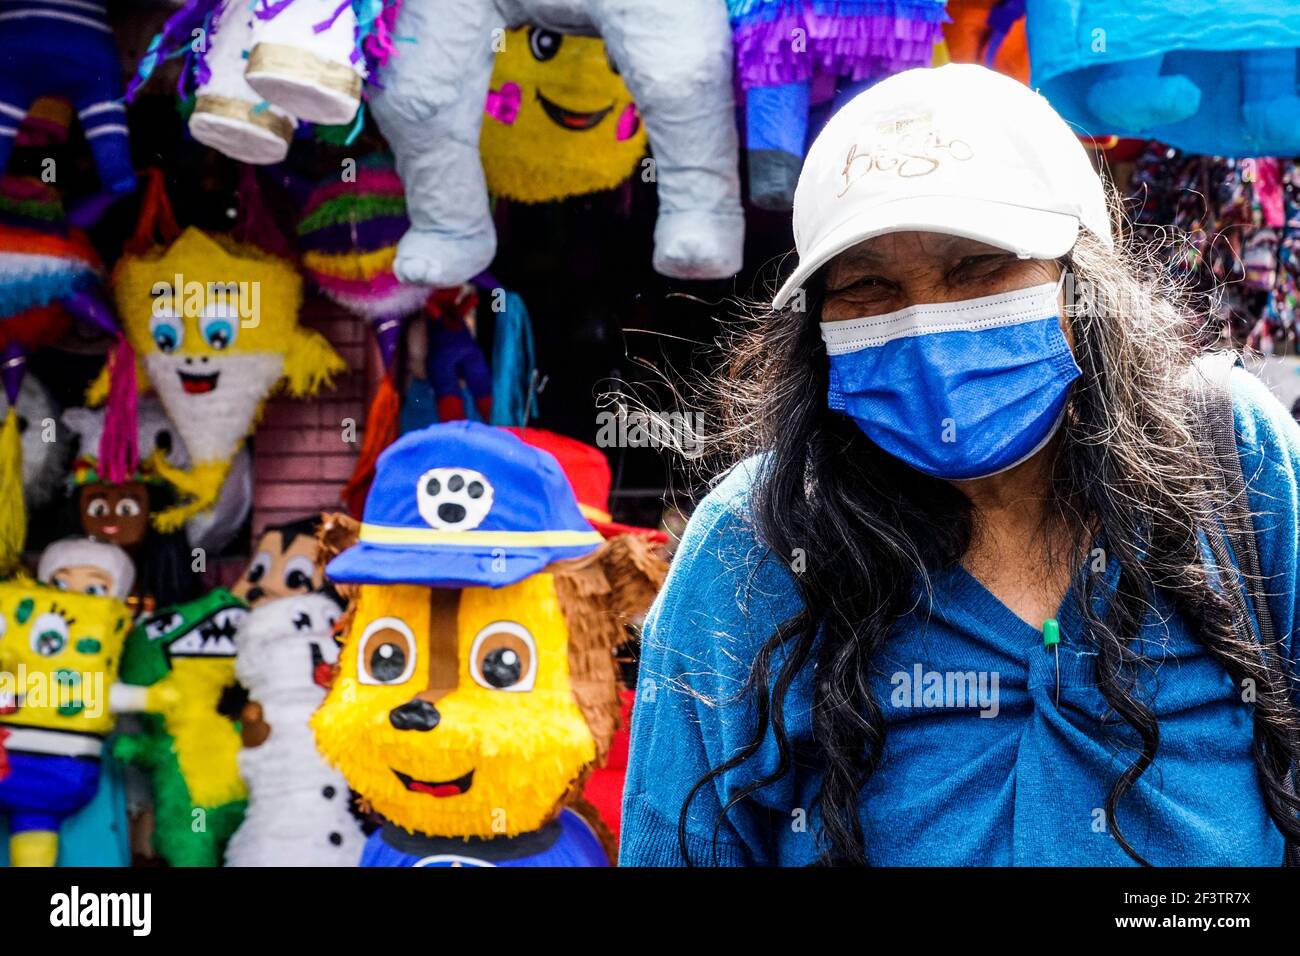 San Salvador, El Salvador. 17th Mar, 2021. A woman wearing a face mask gestures outside of a piÃ±ata store in San Salvador.El Salvador reports 62,531 COVID-19 confirmed cases and 1962 deaths. Credit: Camilo Freedman/ZUMA Wire/Alamy Live News Stock Photo